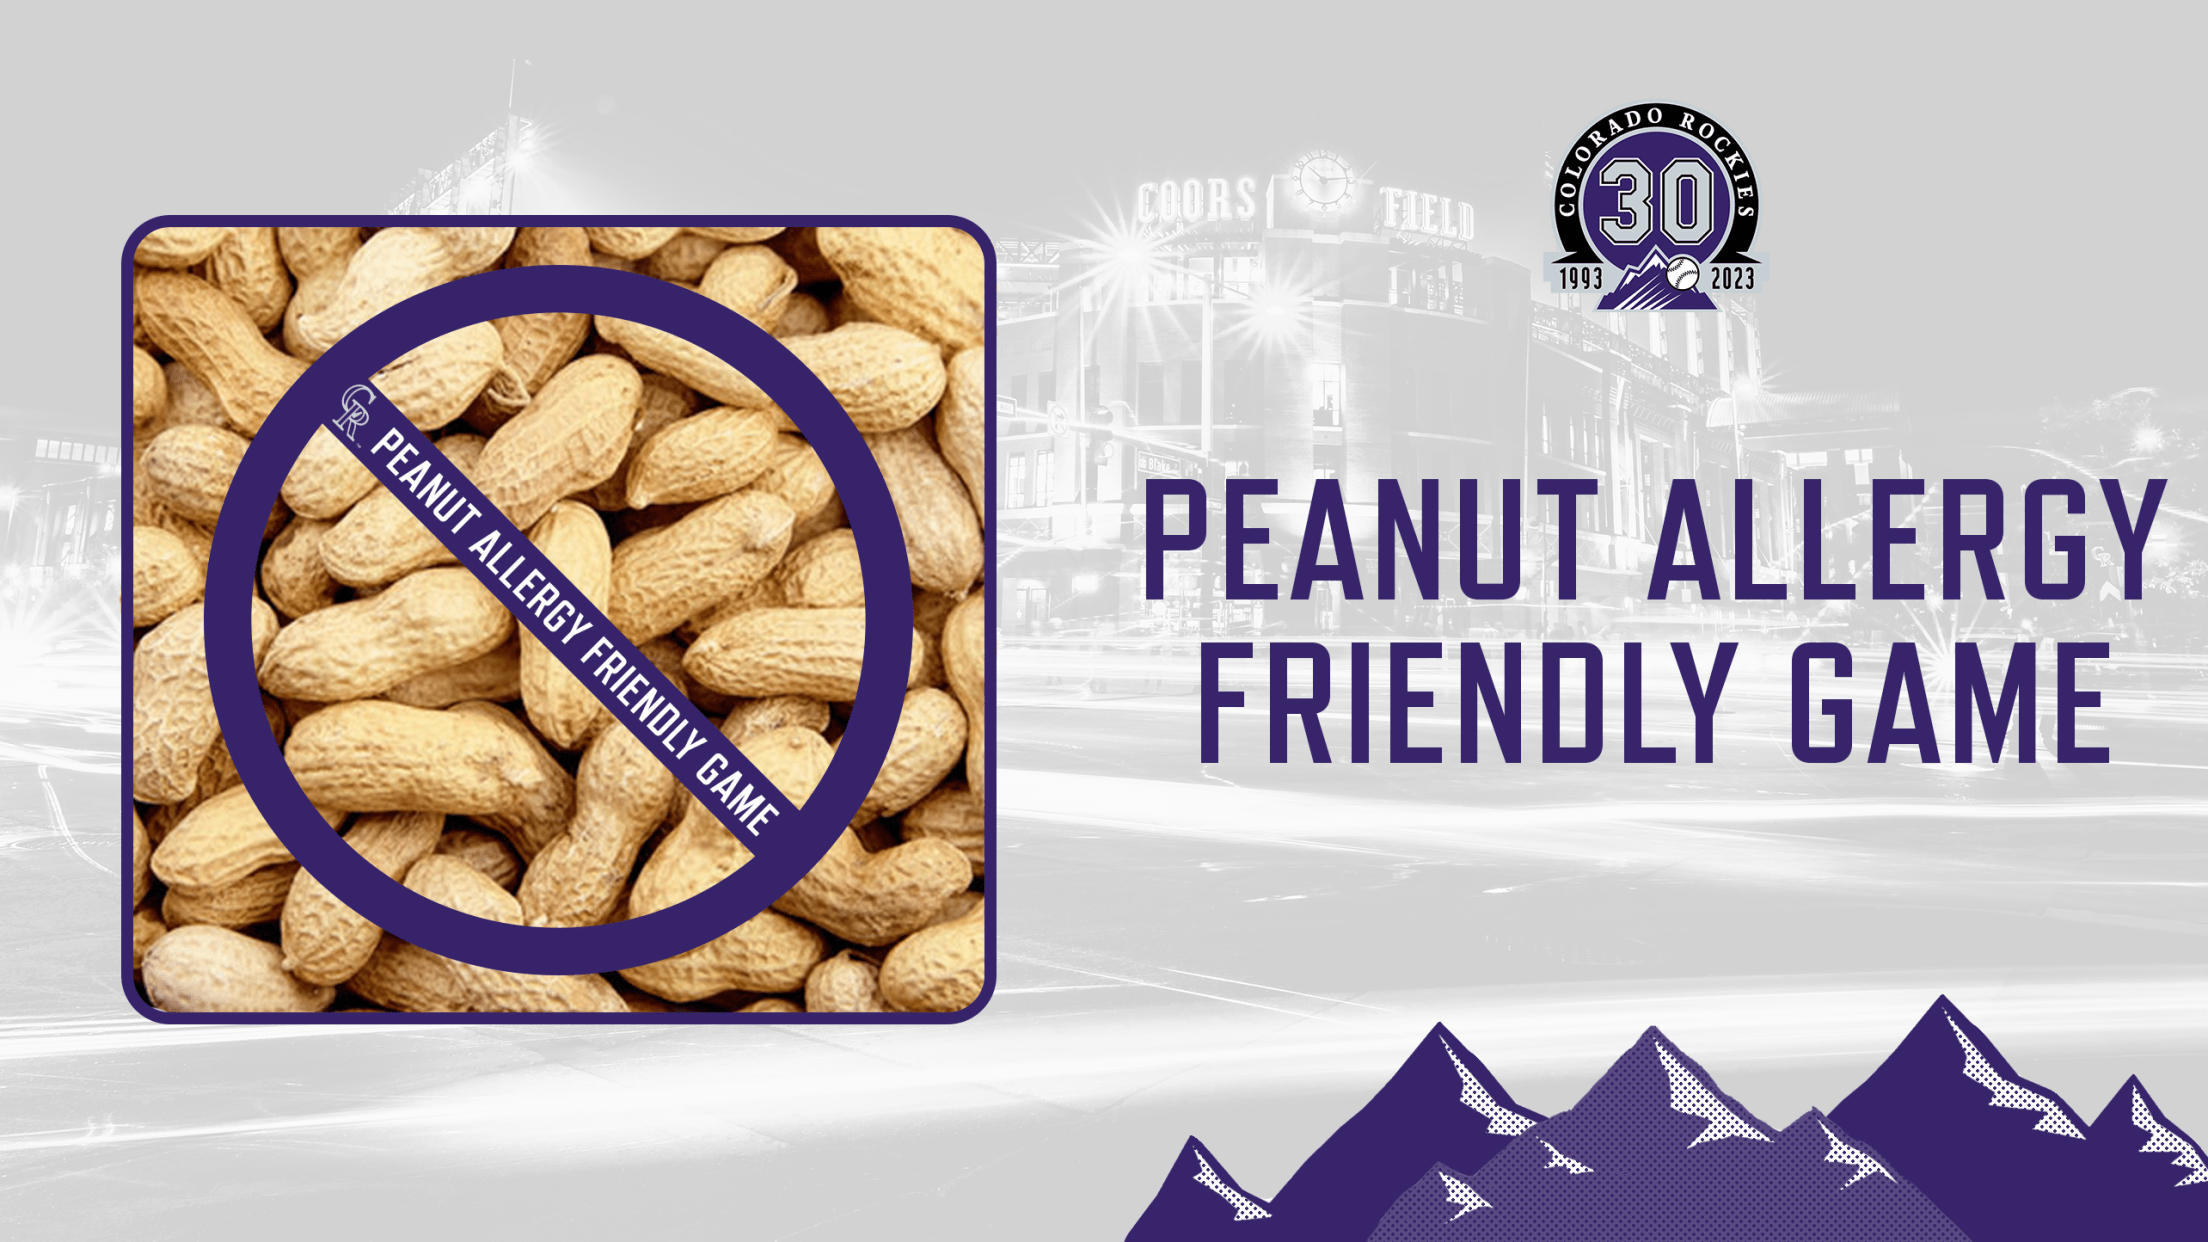 Food allergies so bad that some baseball games have added peanut